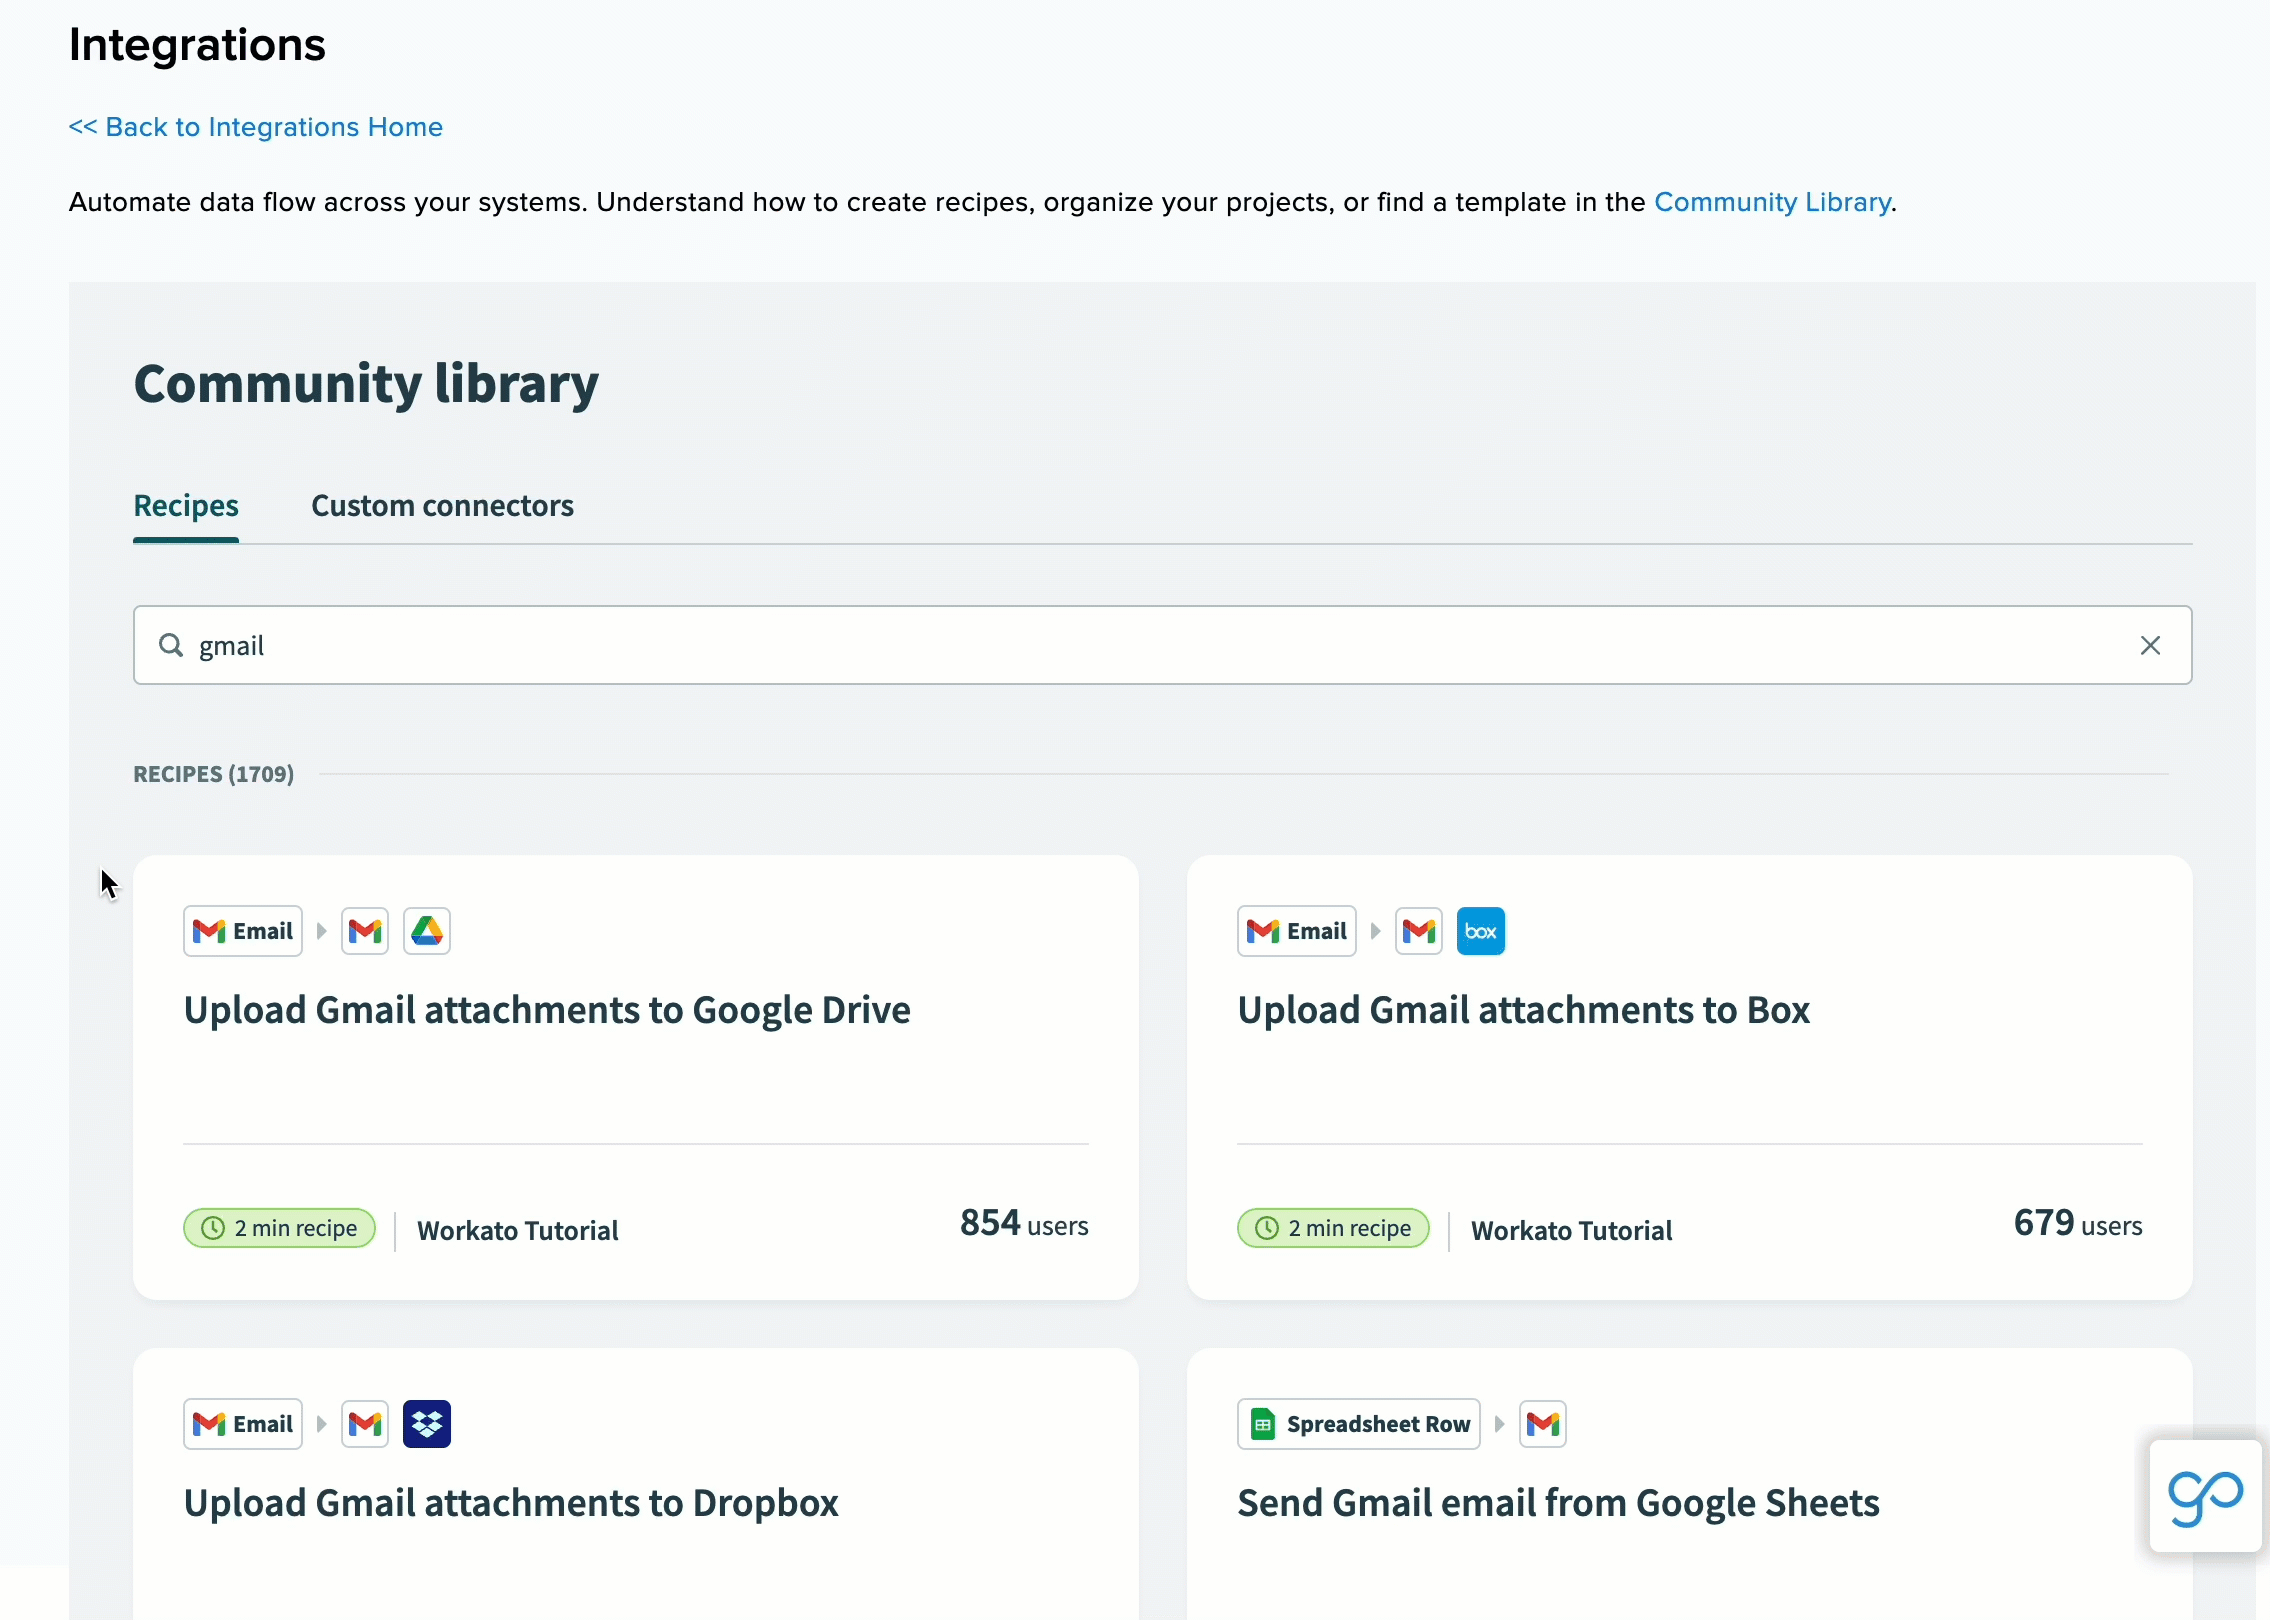 Integrations_Community_Library_Search.gif